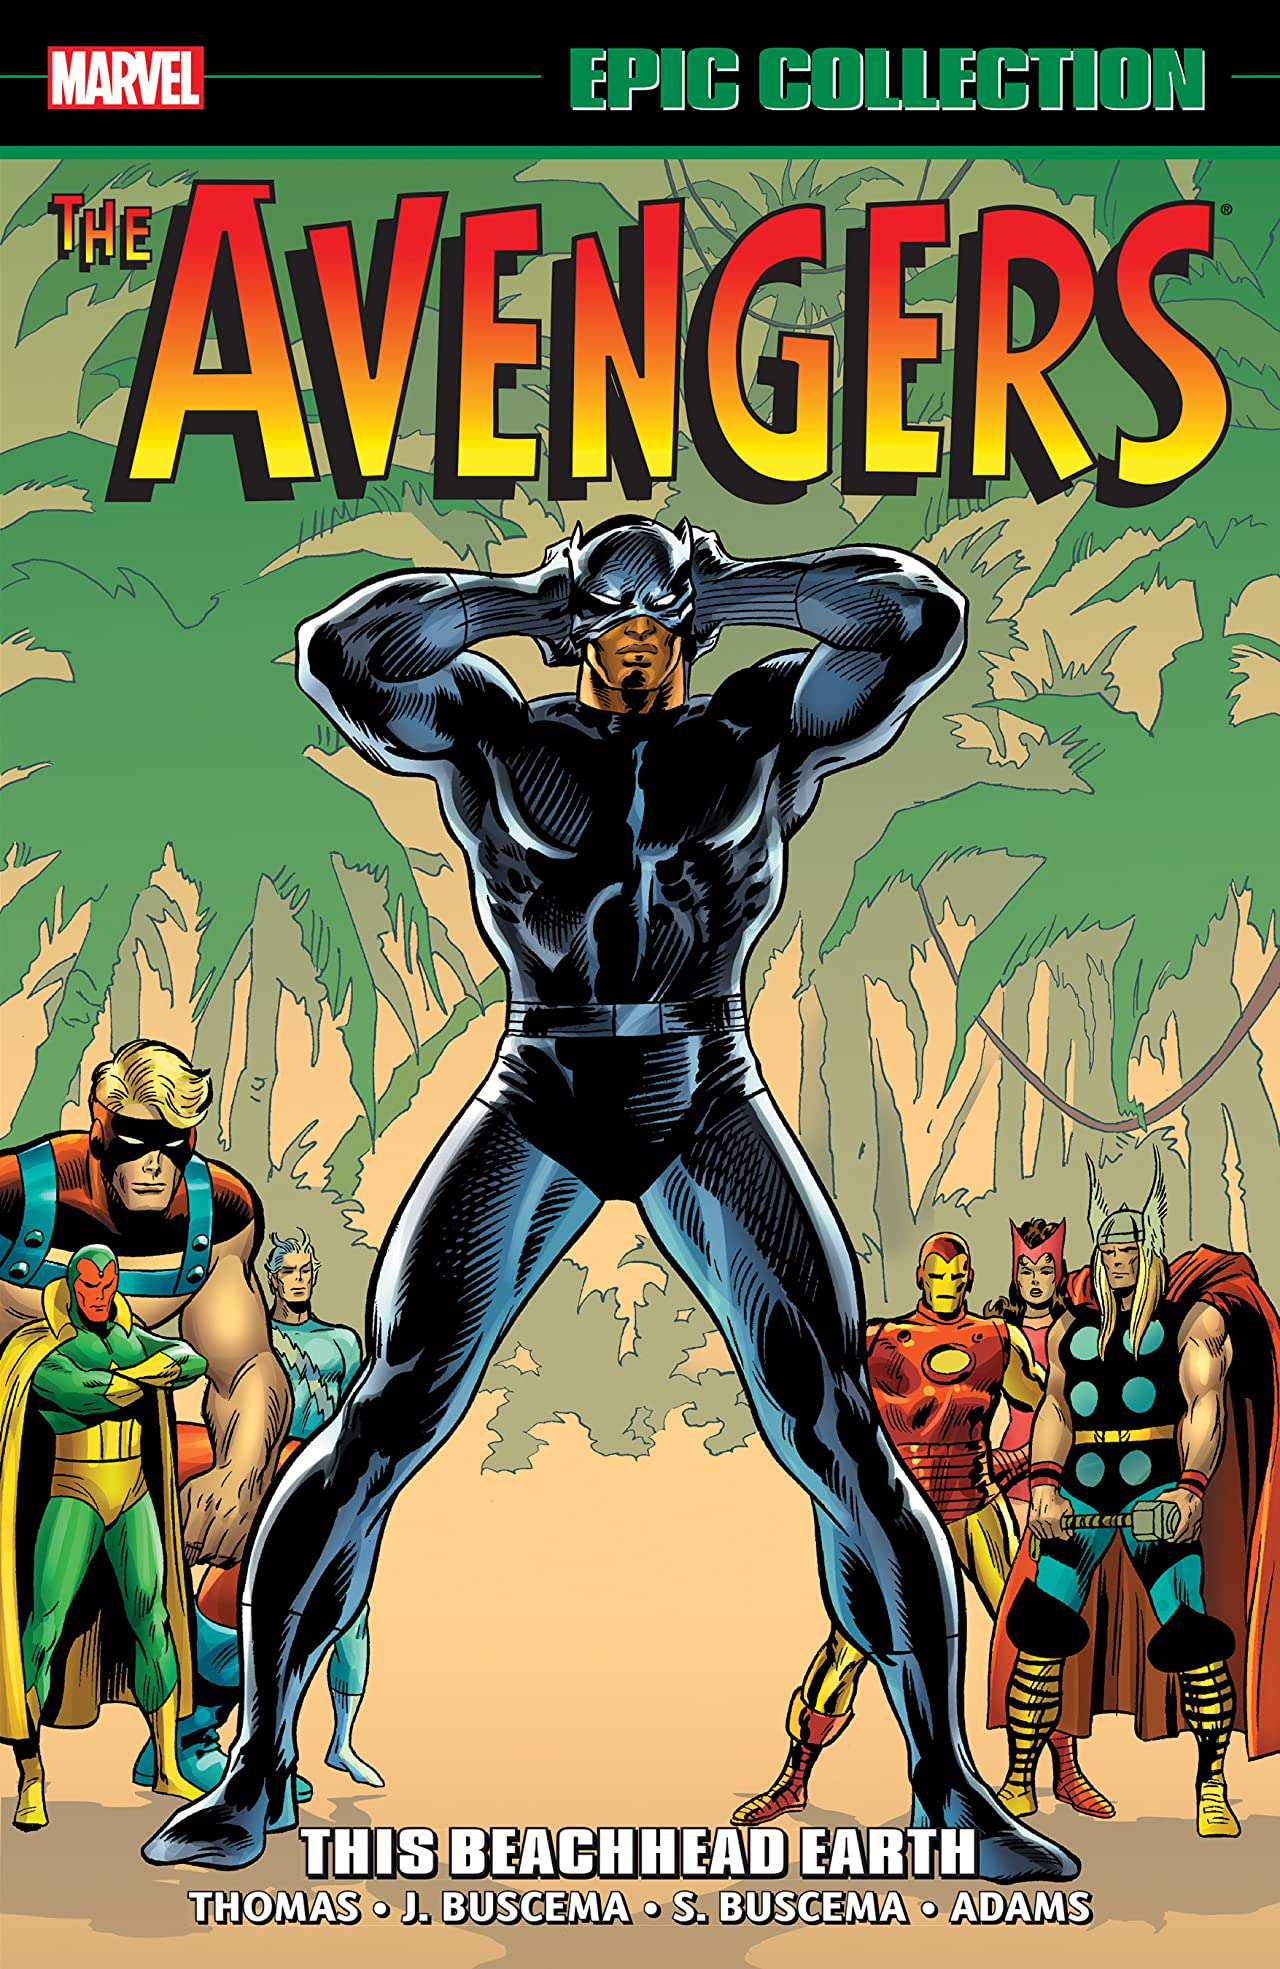 Avengers Epic Collection Graphic Novel Volume 5 This Beachhead Earth